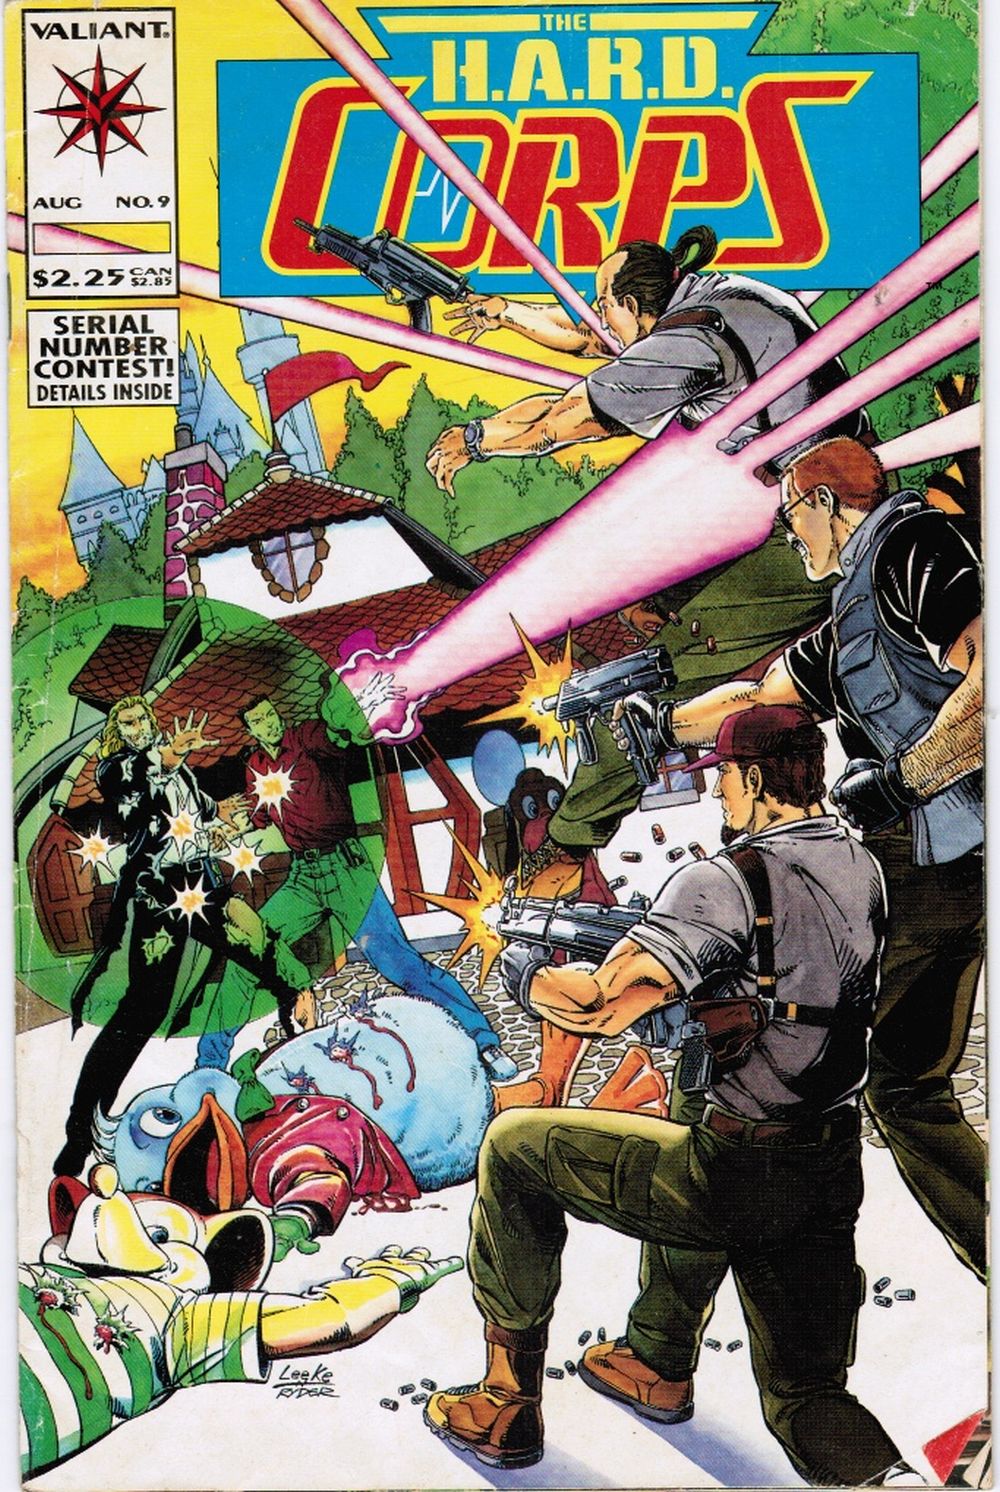 DAVID MICHELINIE, WRITER; BOB LAYTON, EDITOR-IN-CHIEF - H.A. R.D. Corps #9, August 1993 (Harbinger Active Resistance Division)